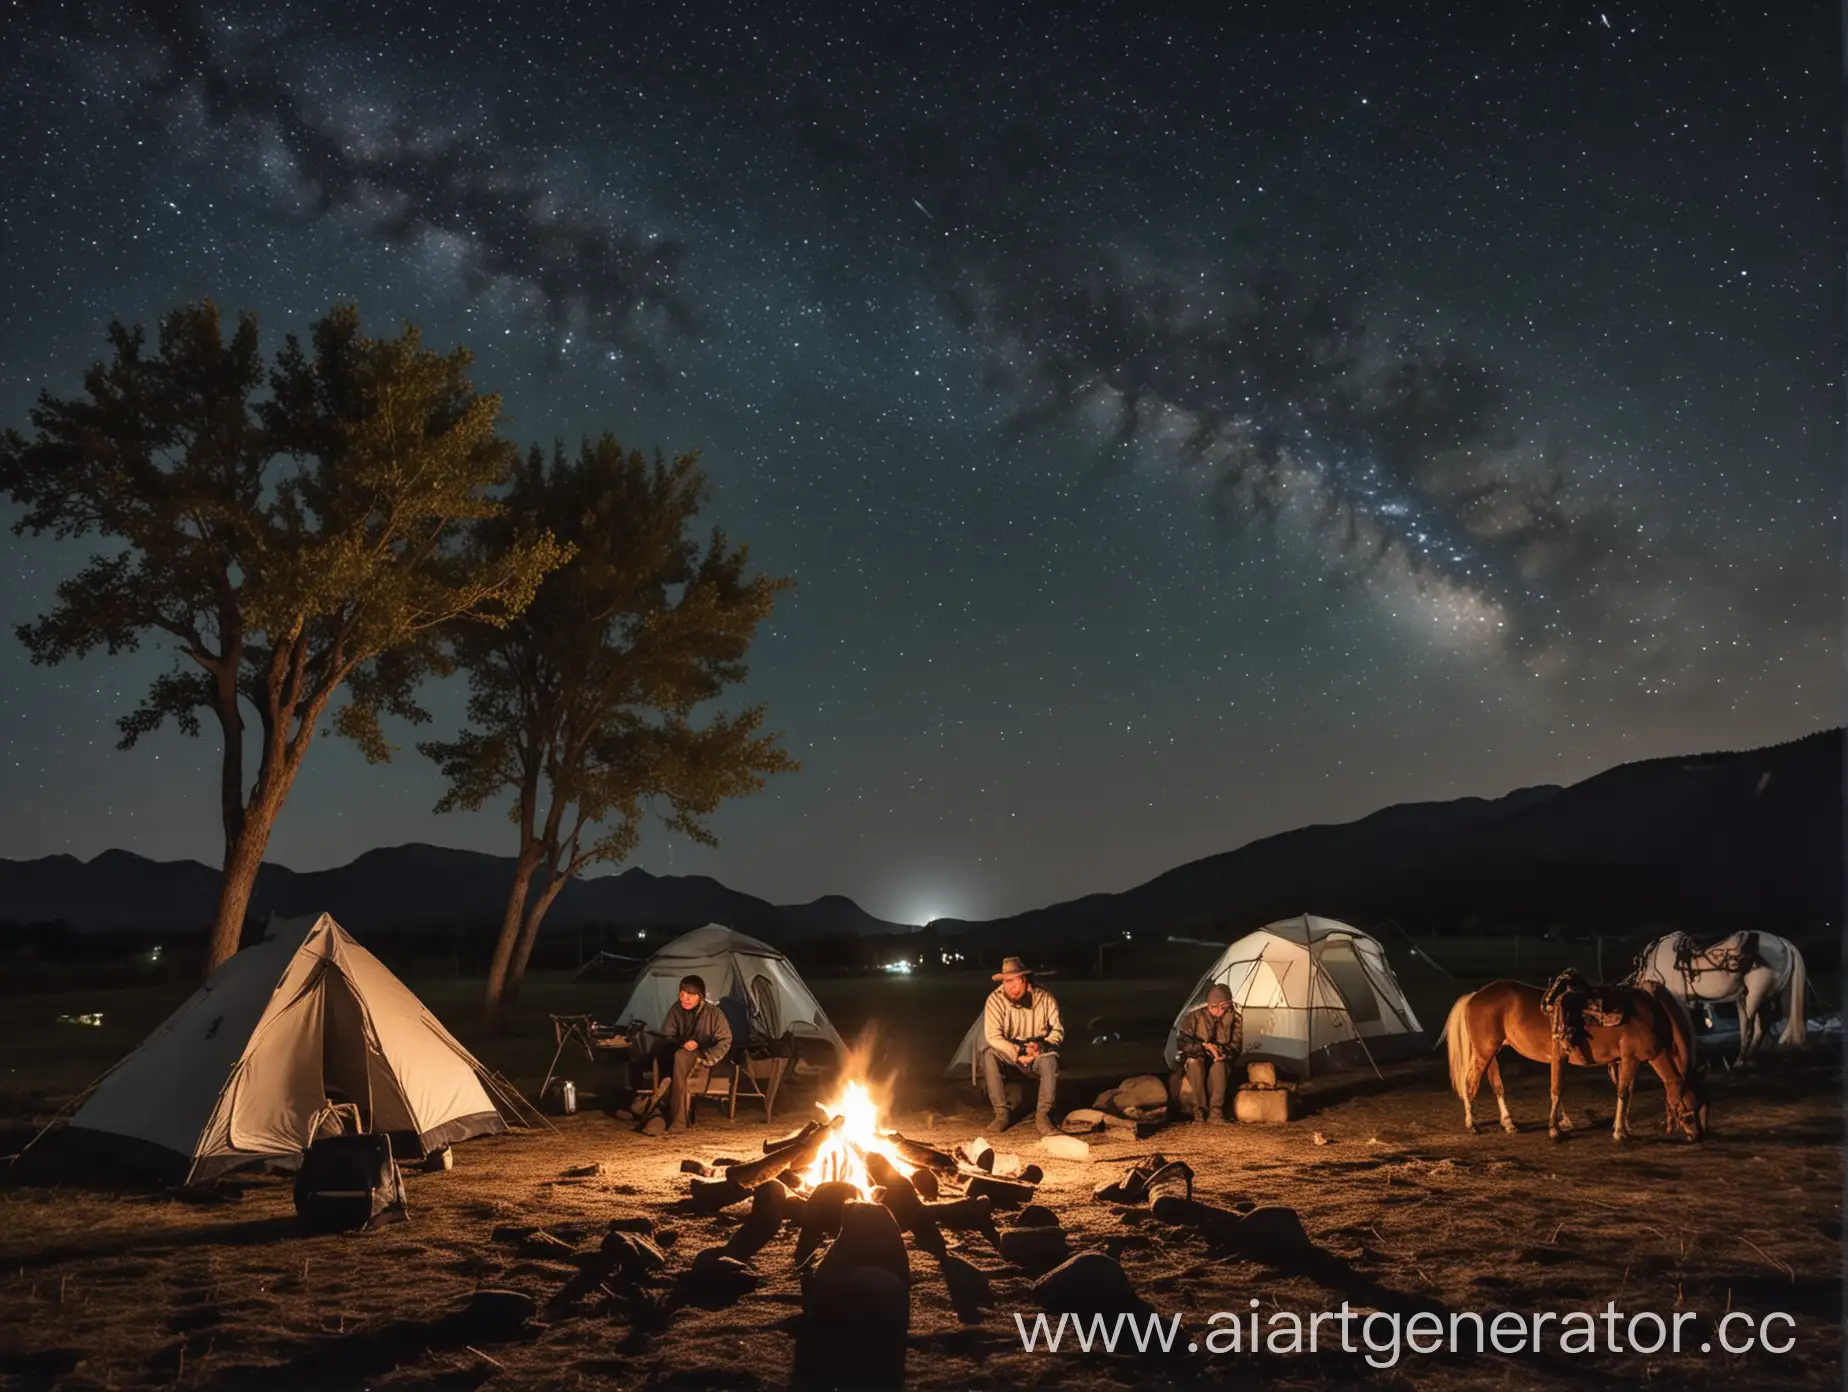 Romantic-Gypsy-Campfire-Night-with-Grazing-Horses-Under-Starry-Sky